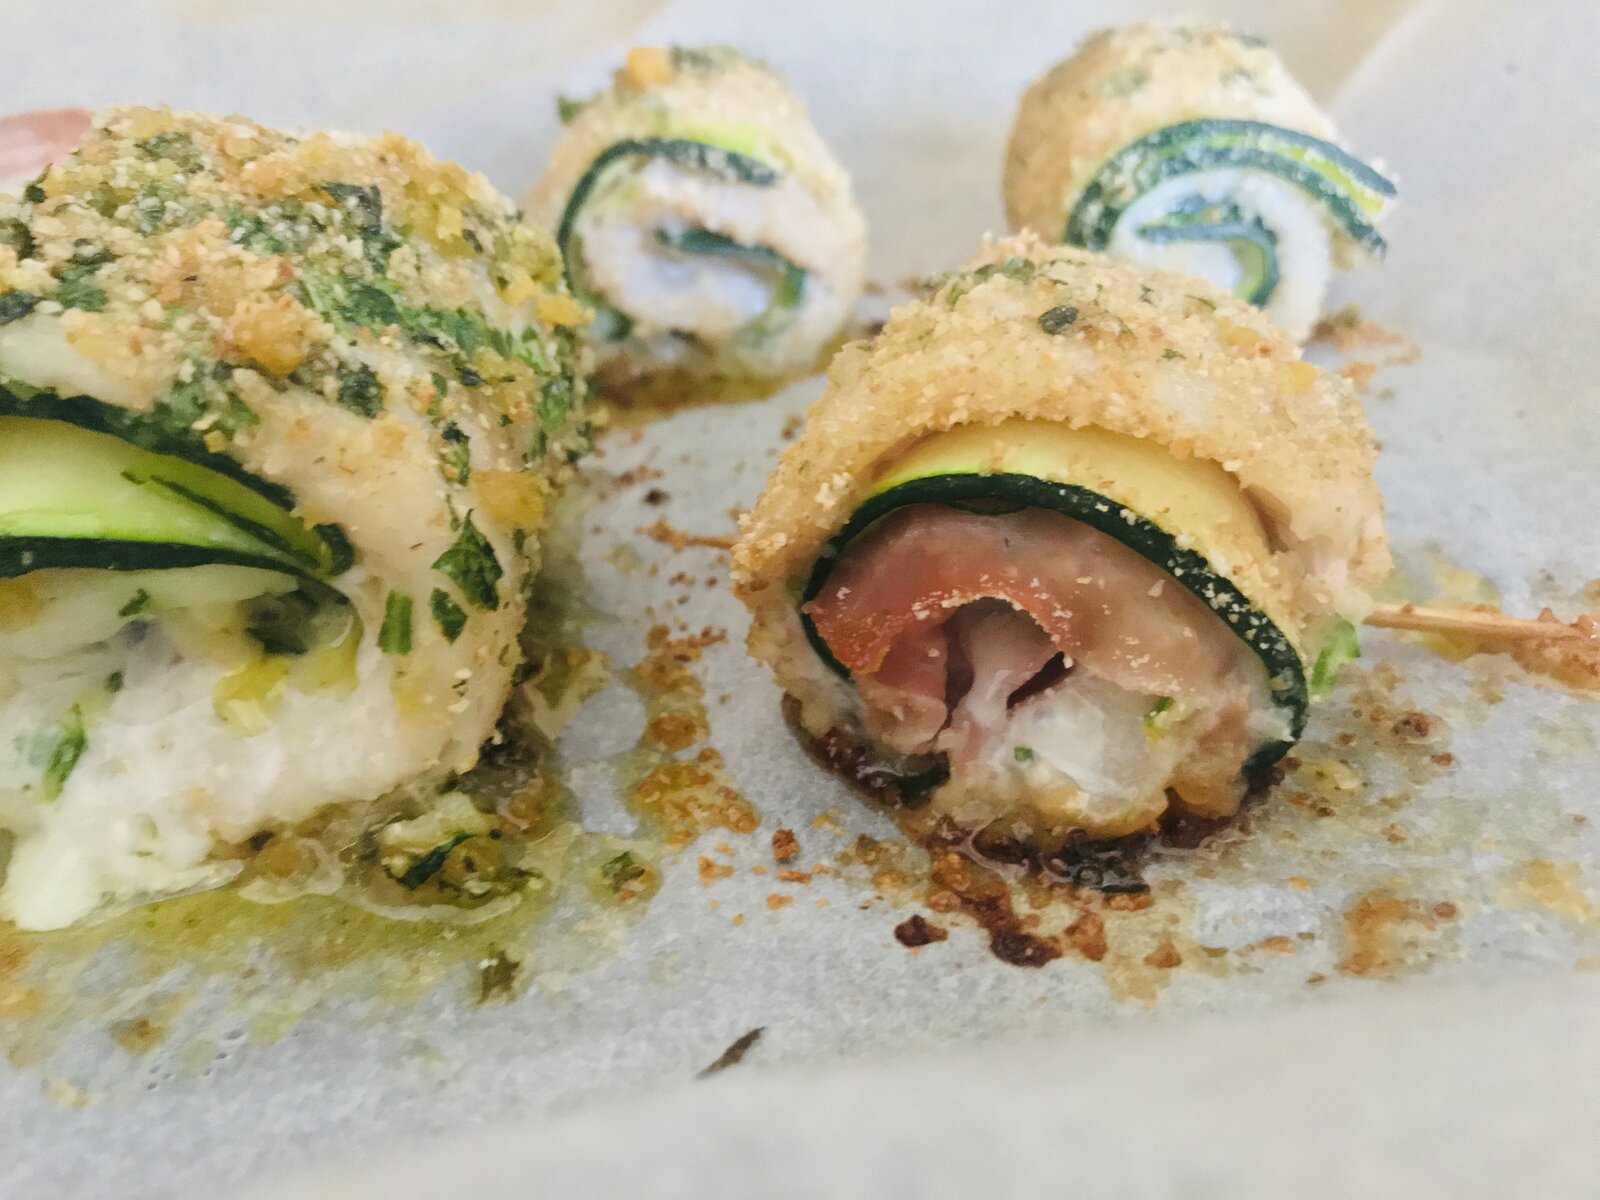 Sole rolls with courgette and Parma ham.jpeg